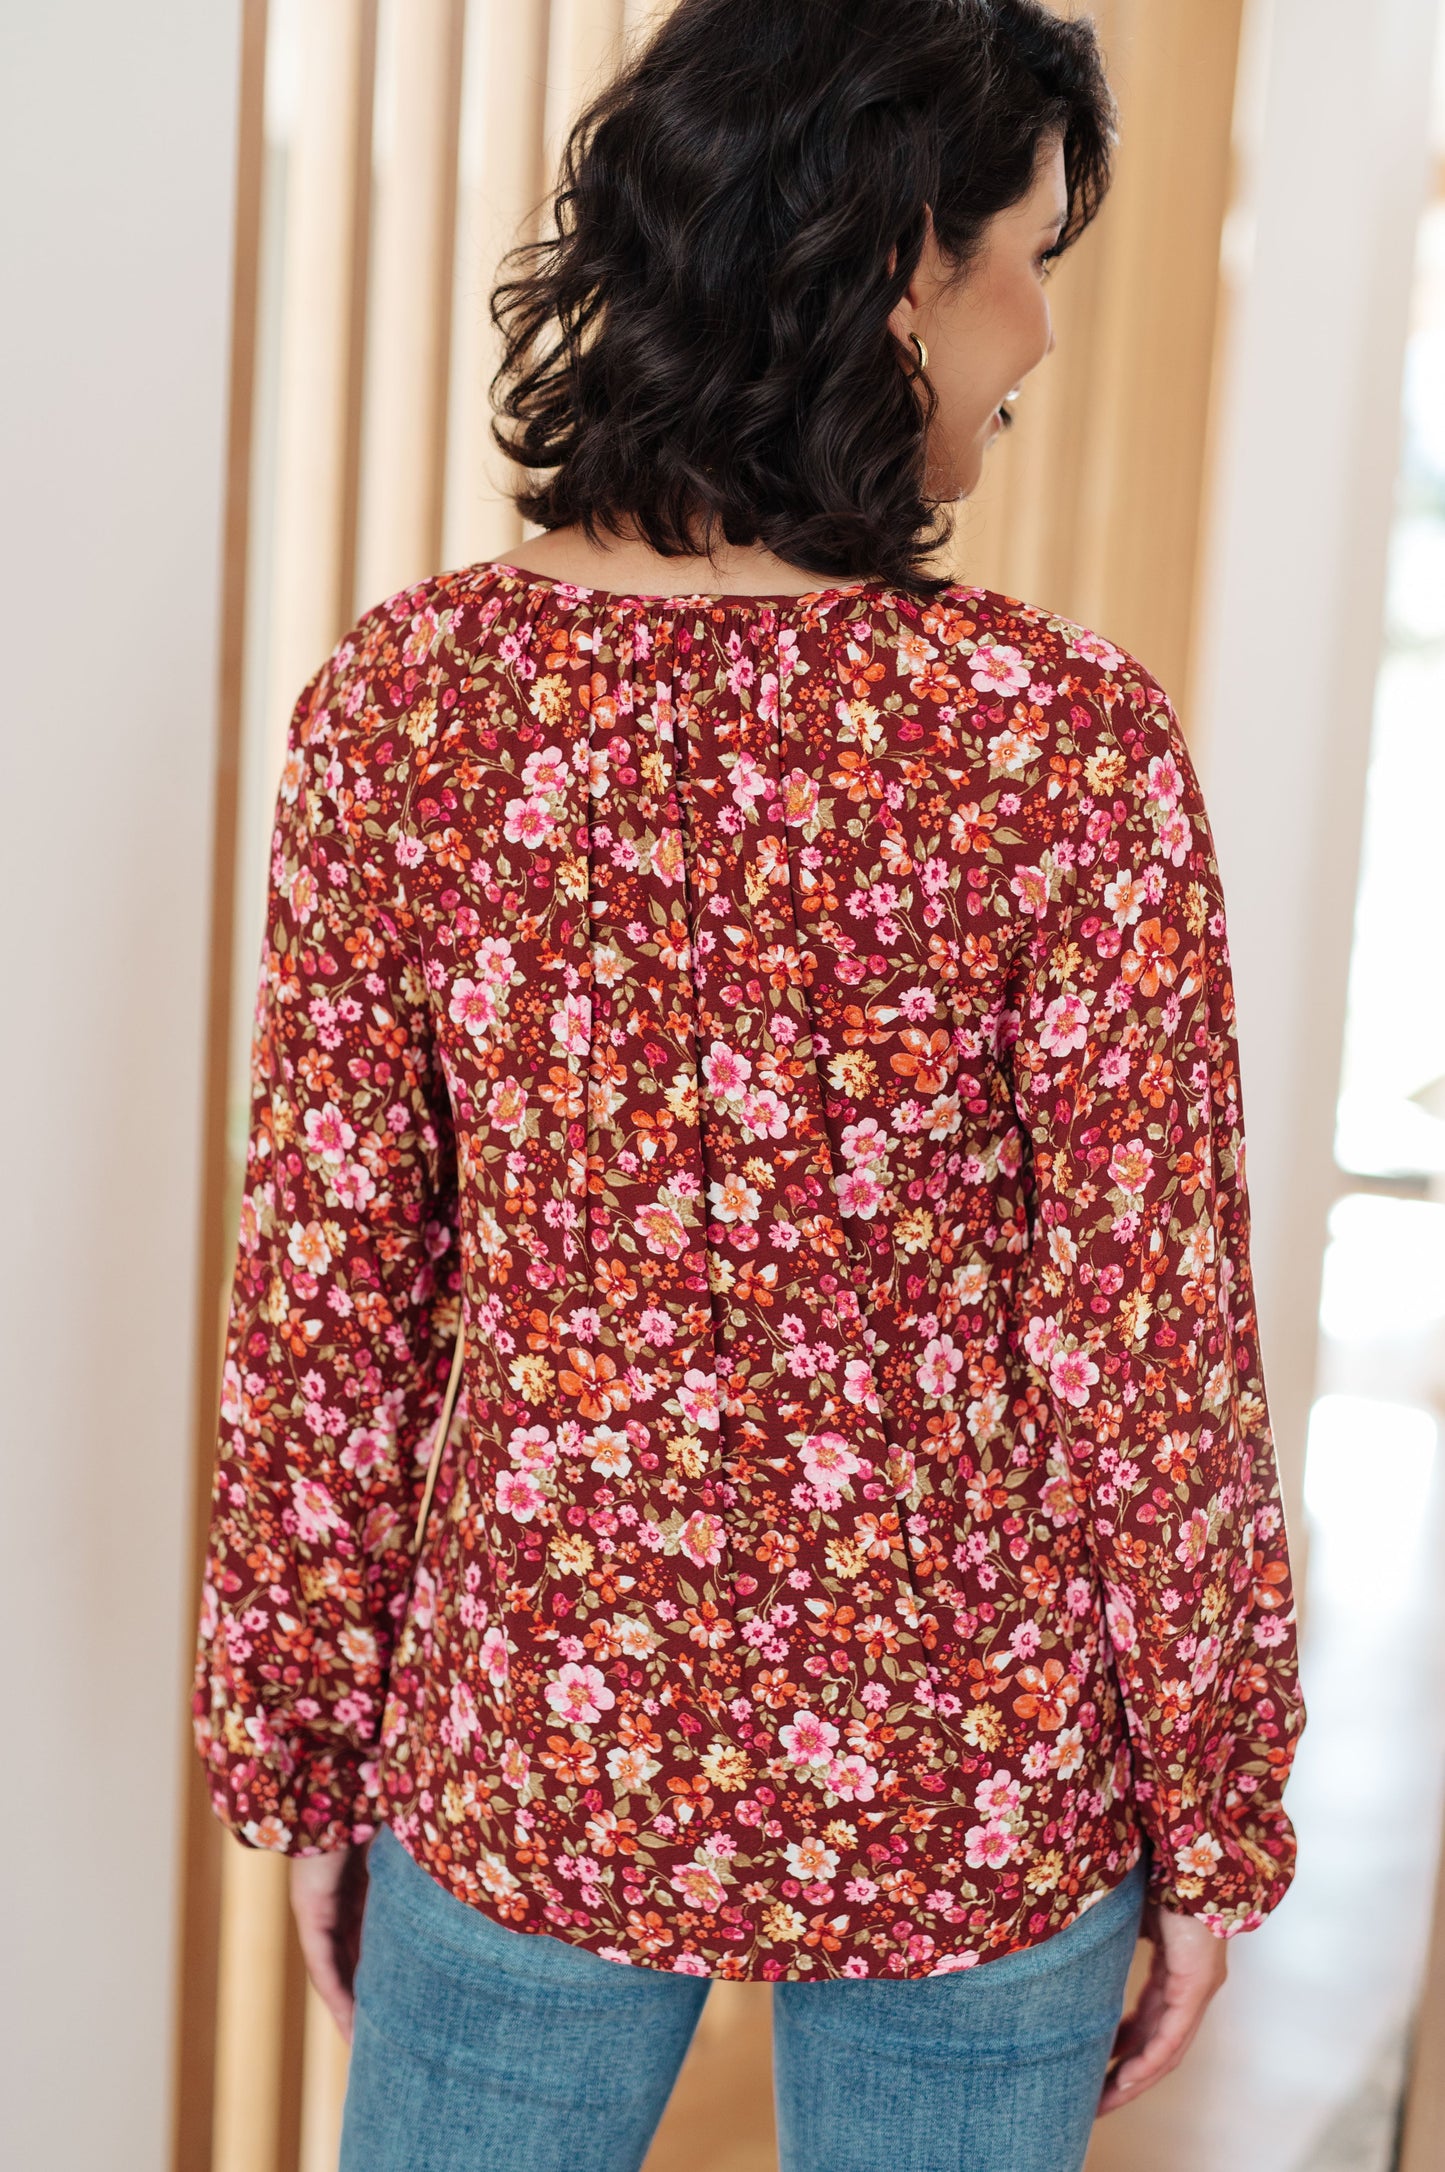 Sunday Afternoon Blouse in Rust Floral